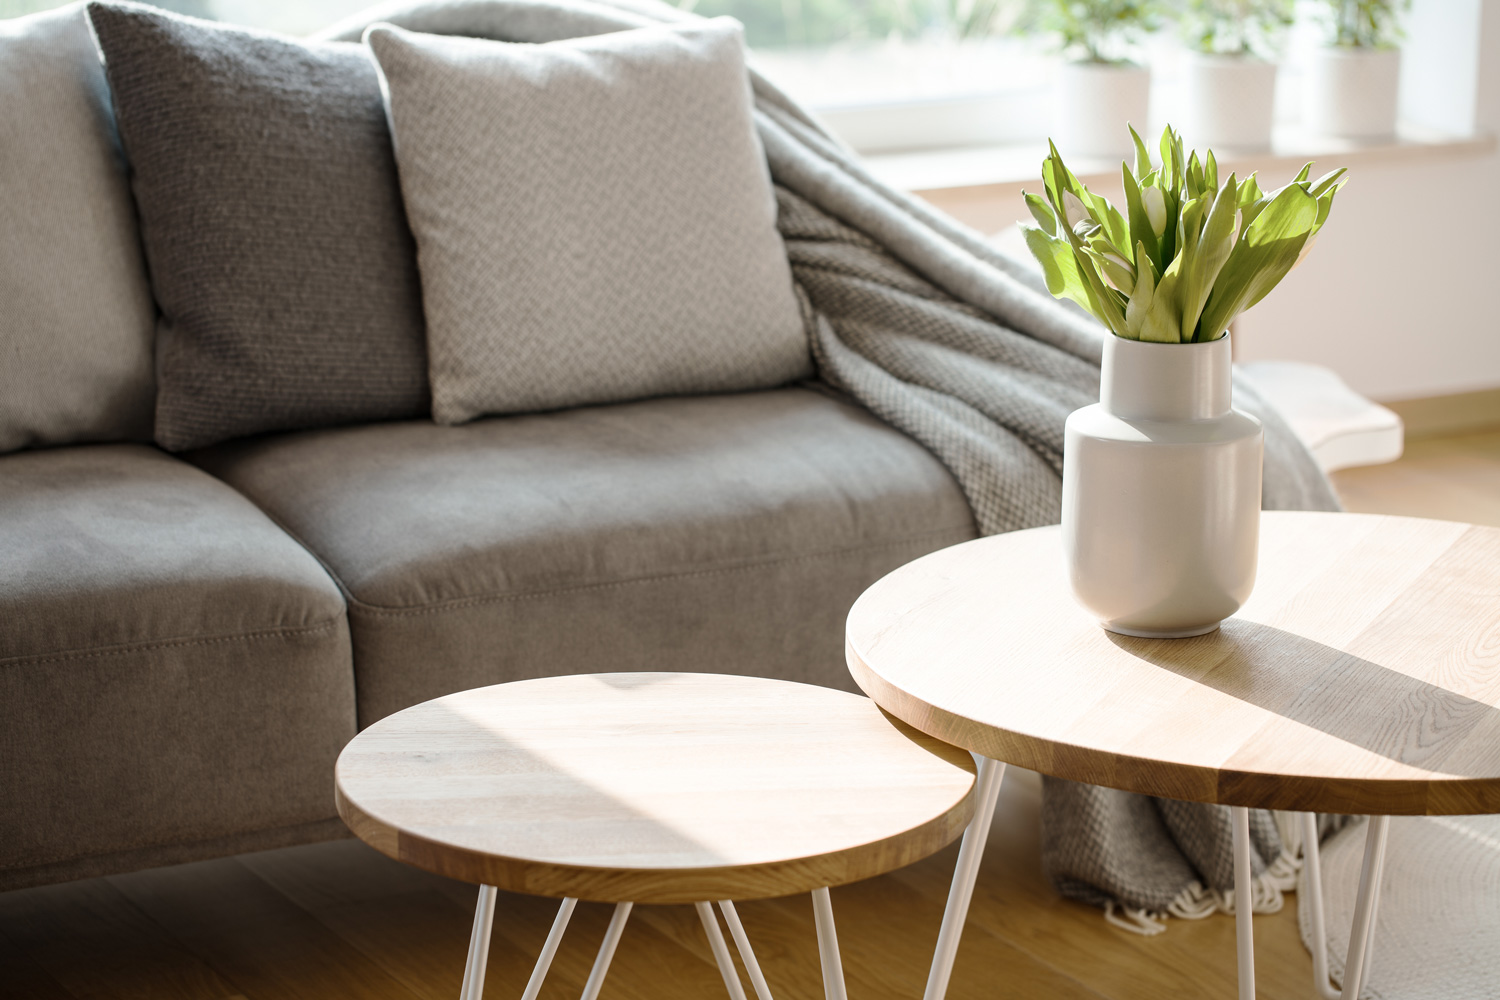 Close-up of tulips on wooden round table in natural grey living room interior with couch